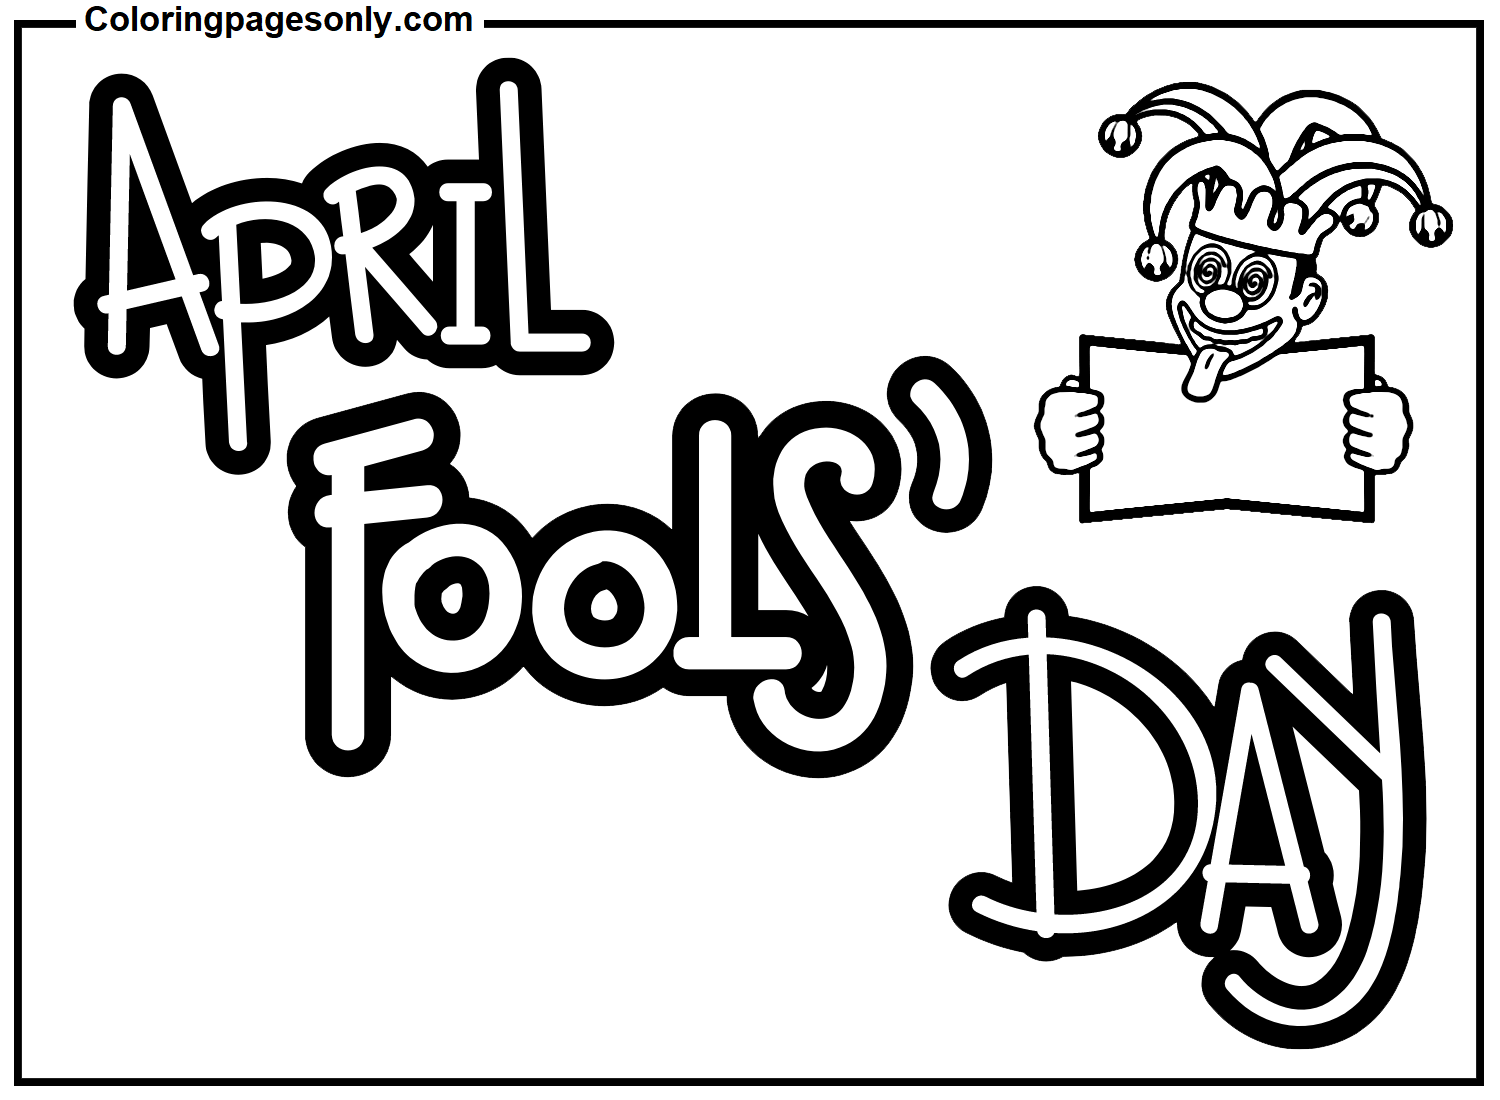 April Fools’ Day Pictures Coloring Page